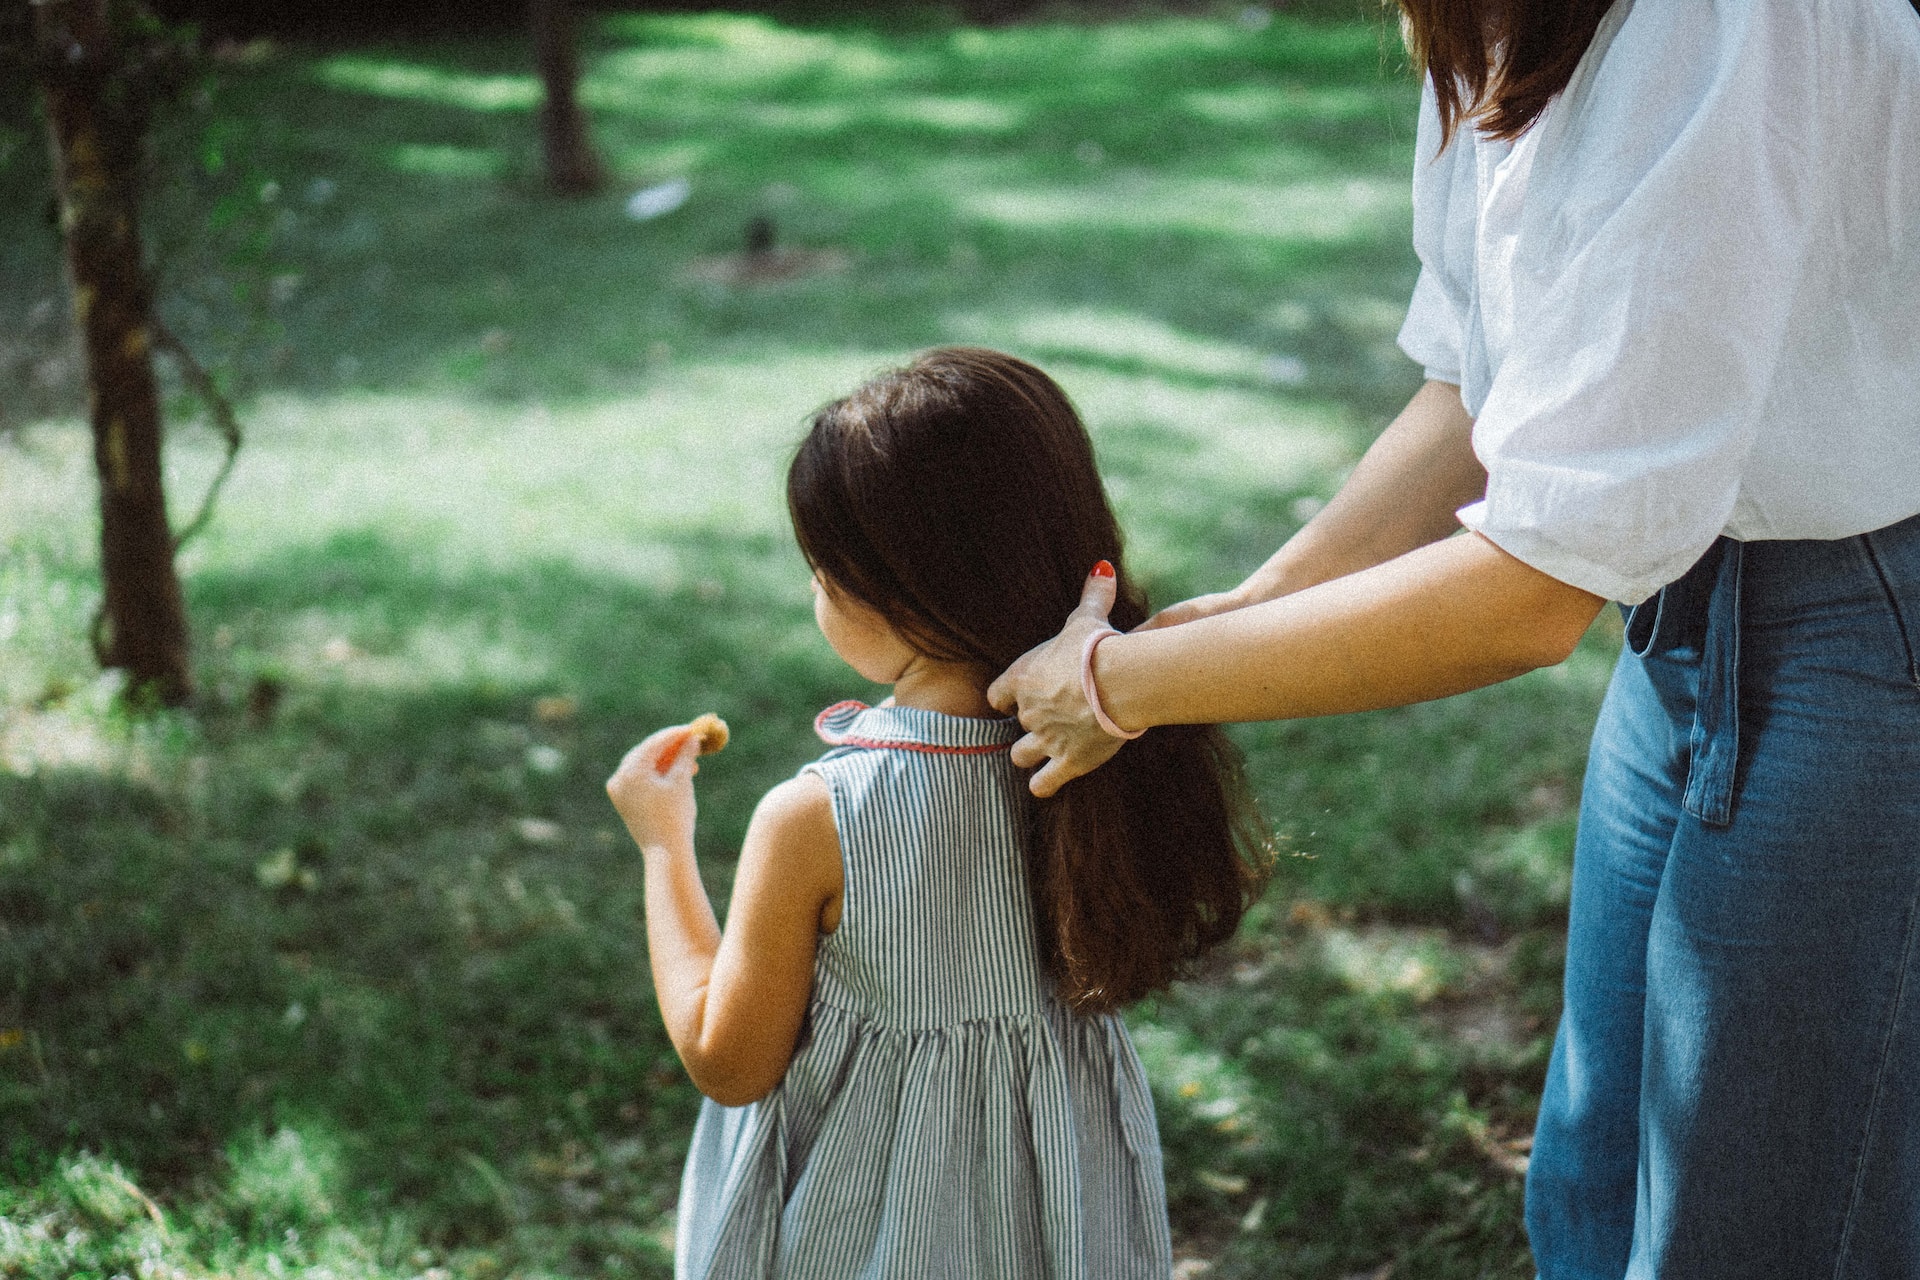 Girlmom, Love Images, Daughter, Human, Clothing, Apparel, Plant, Hand, Pants, Holding Hands, Dress, Jeans, Female, Child, Hair